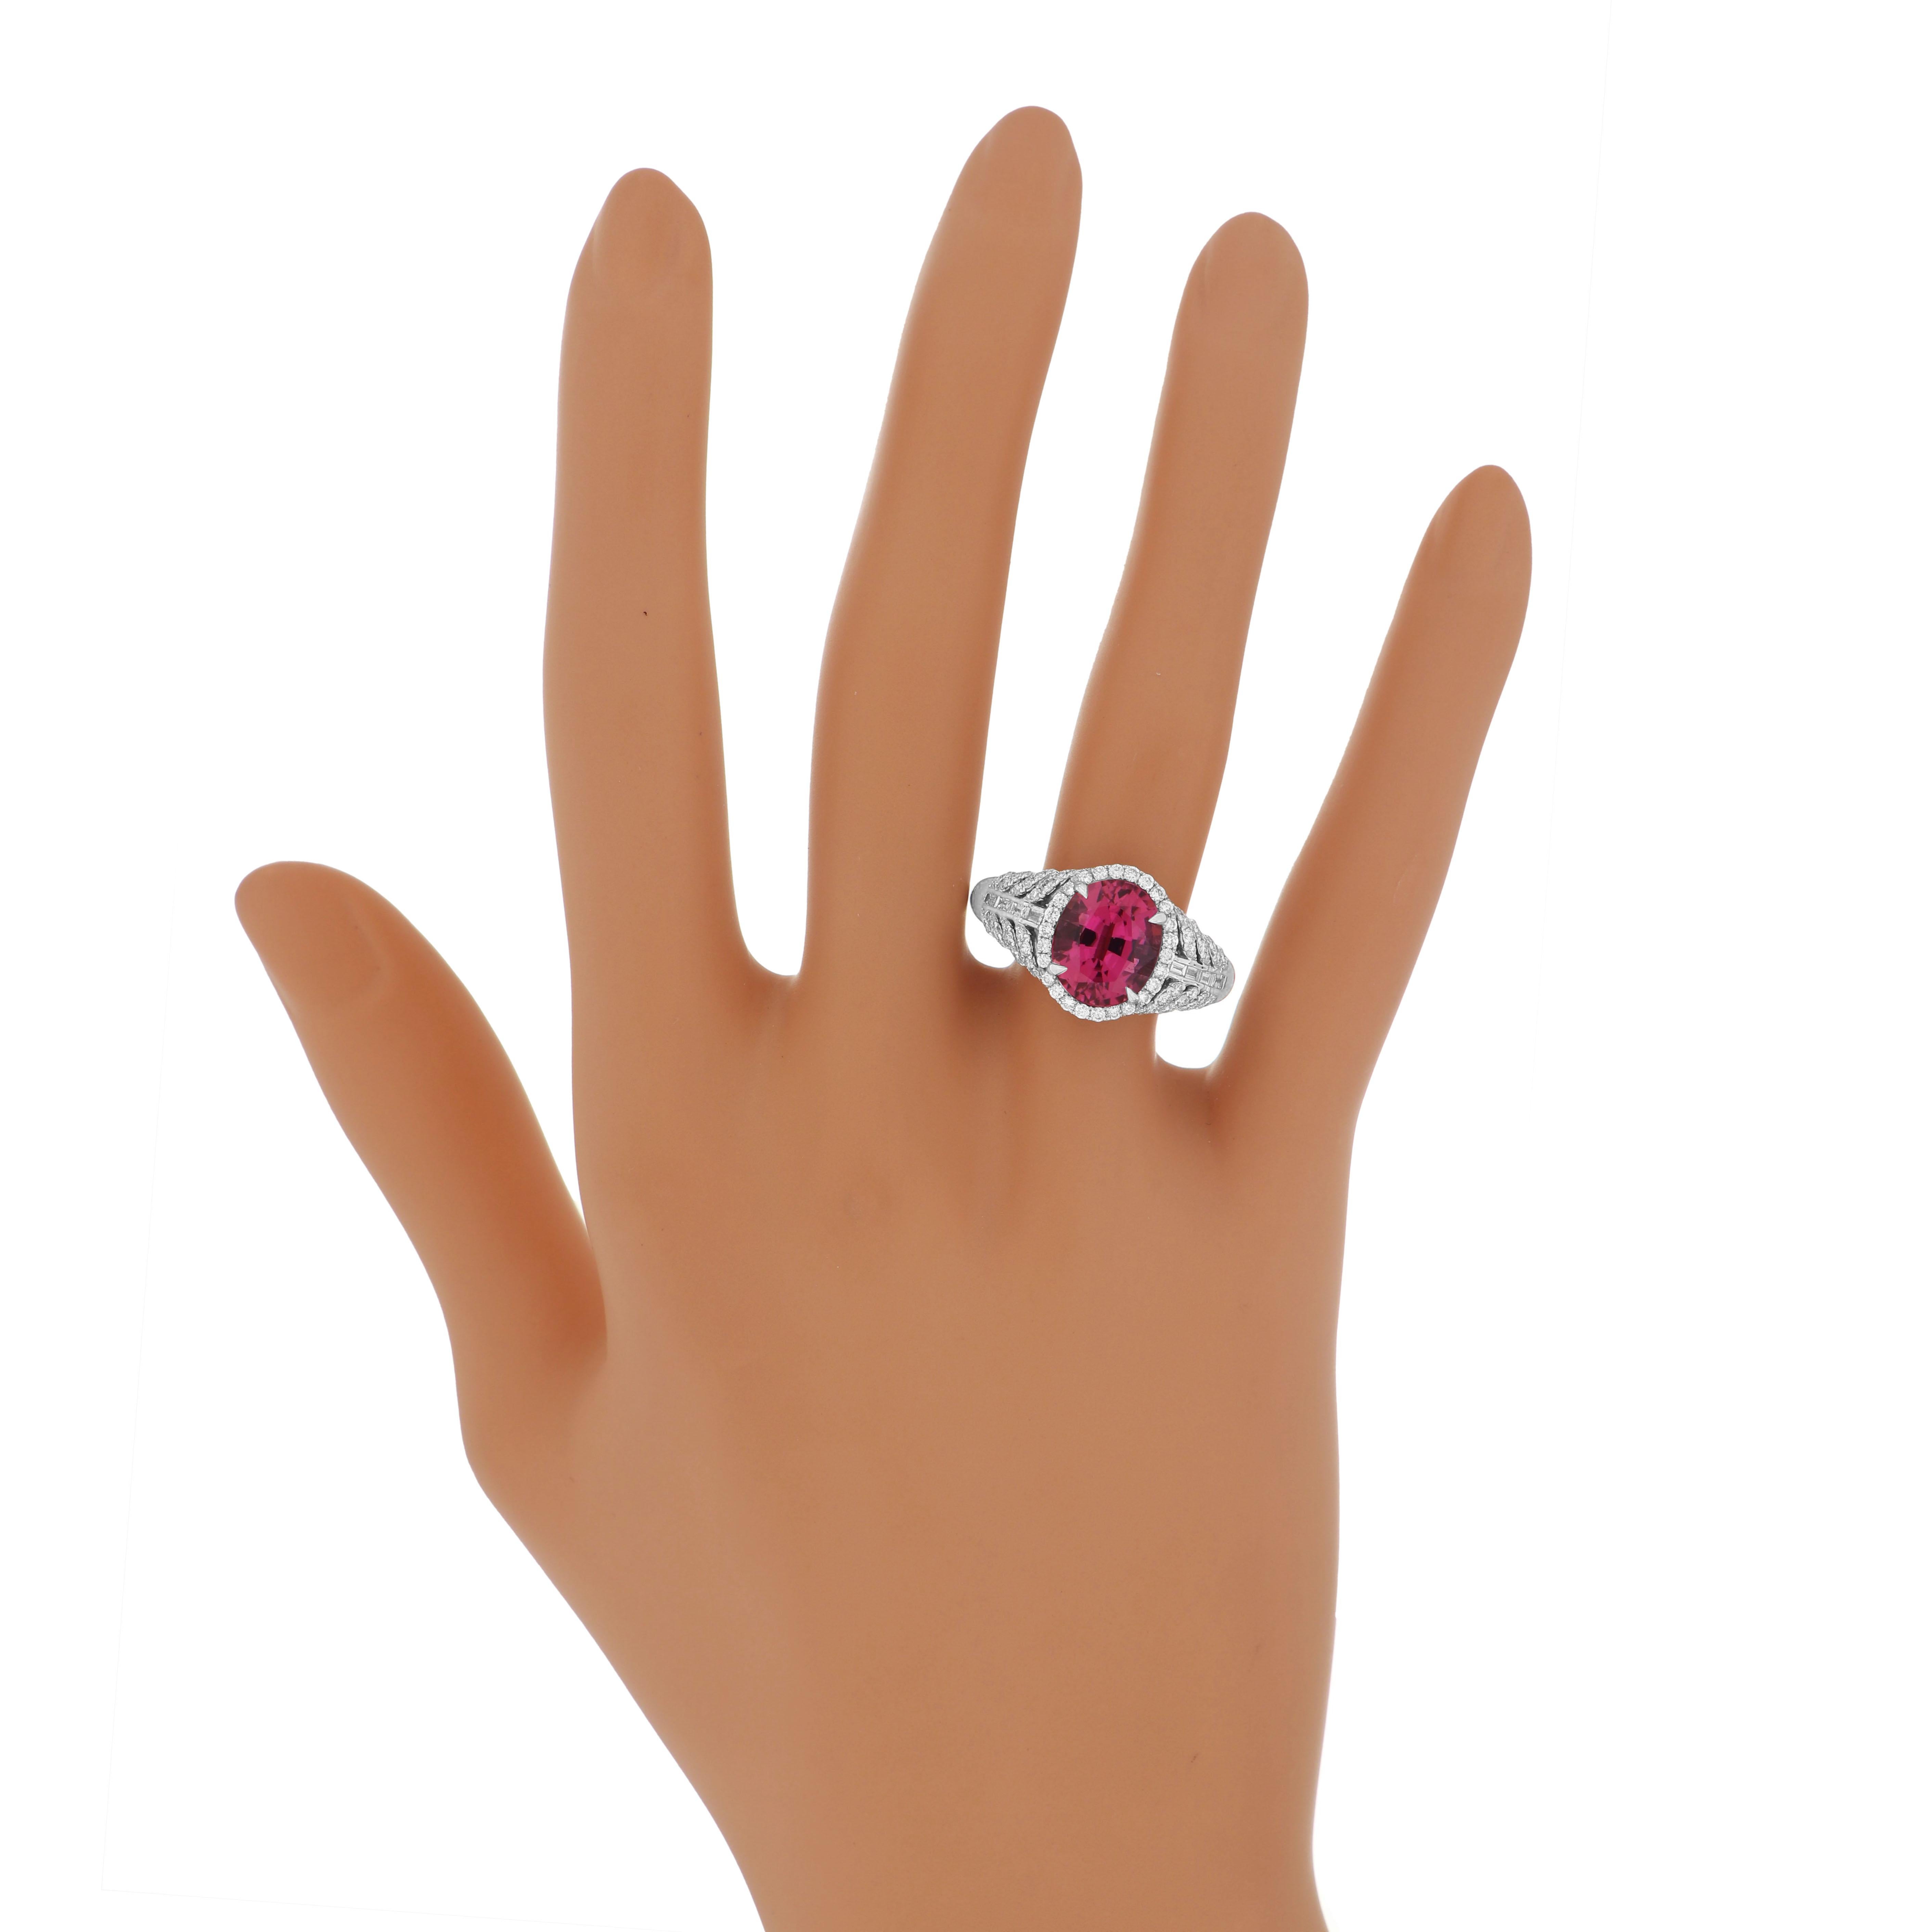 3.85 Carats Rubellite and Diamond Studded Ring in 18K White Gold Ring For Sale 3